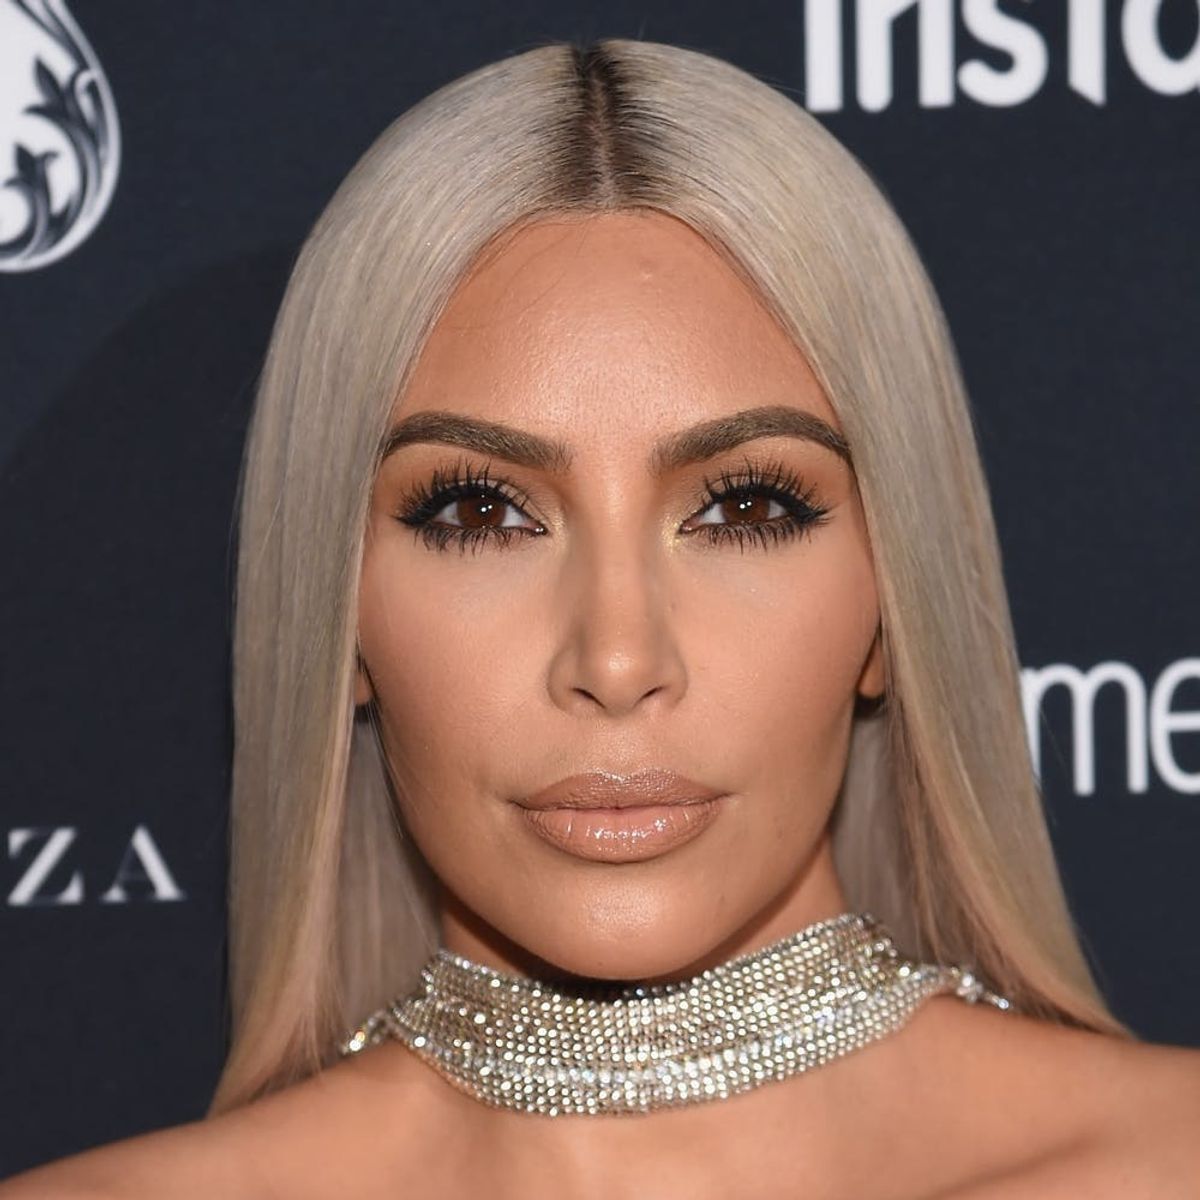 Kim Kardashian West Is Being Called Out for Excluding Male Models in Her Beauty Ads